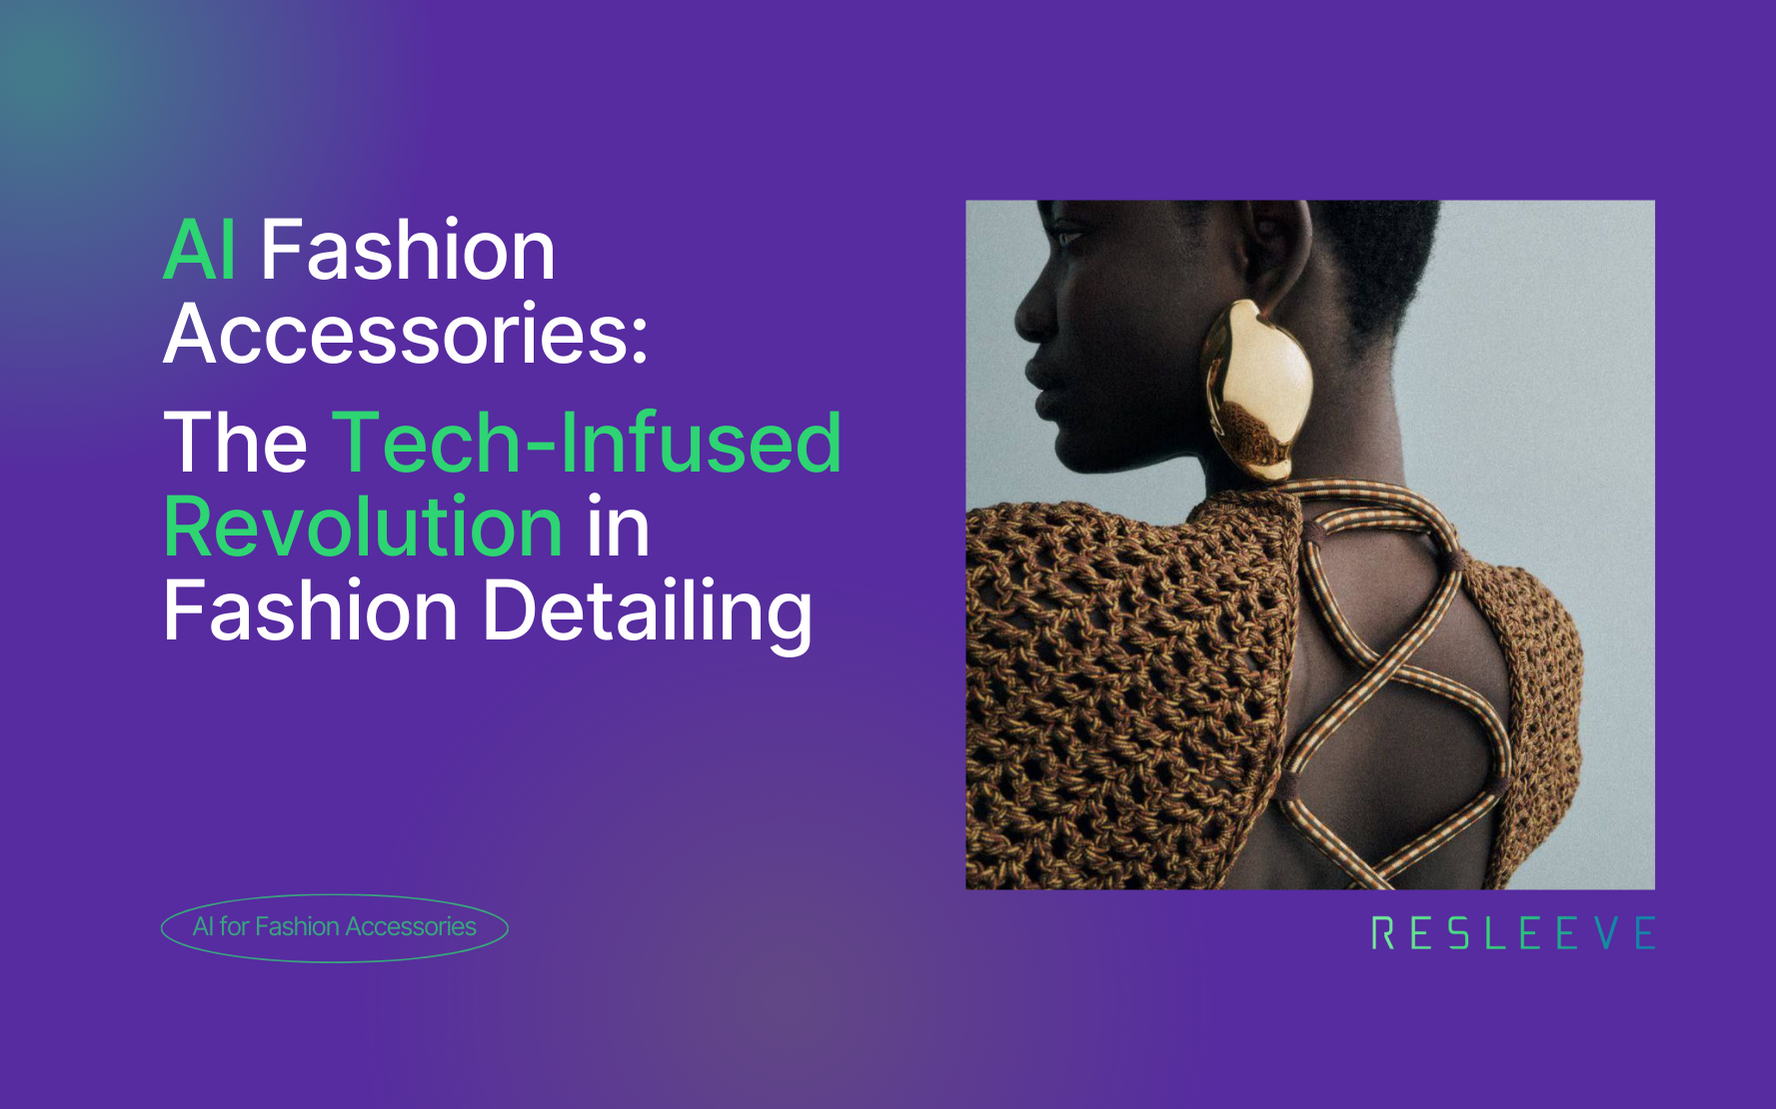 AI Fashion Accessories: The Tech-Infused Revolution in Fashion Detailing